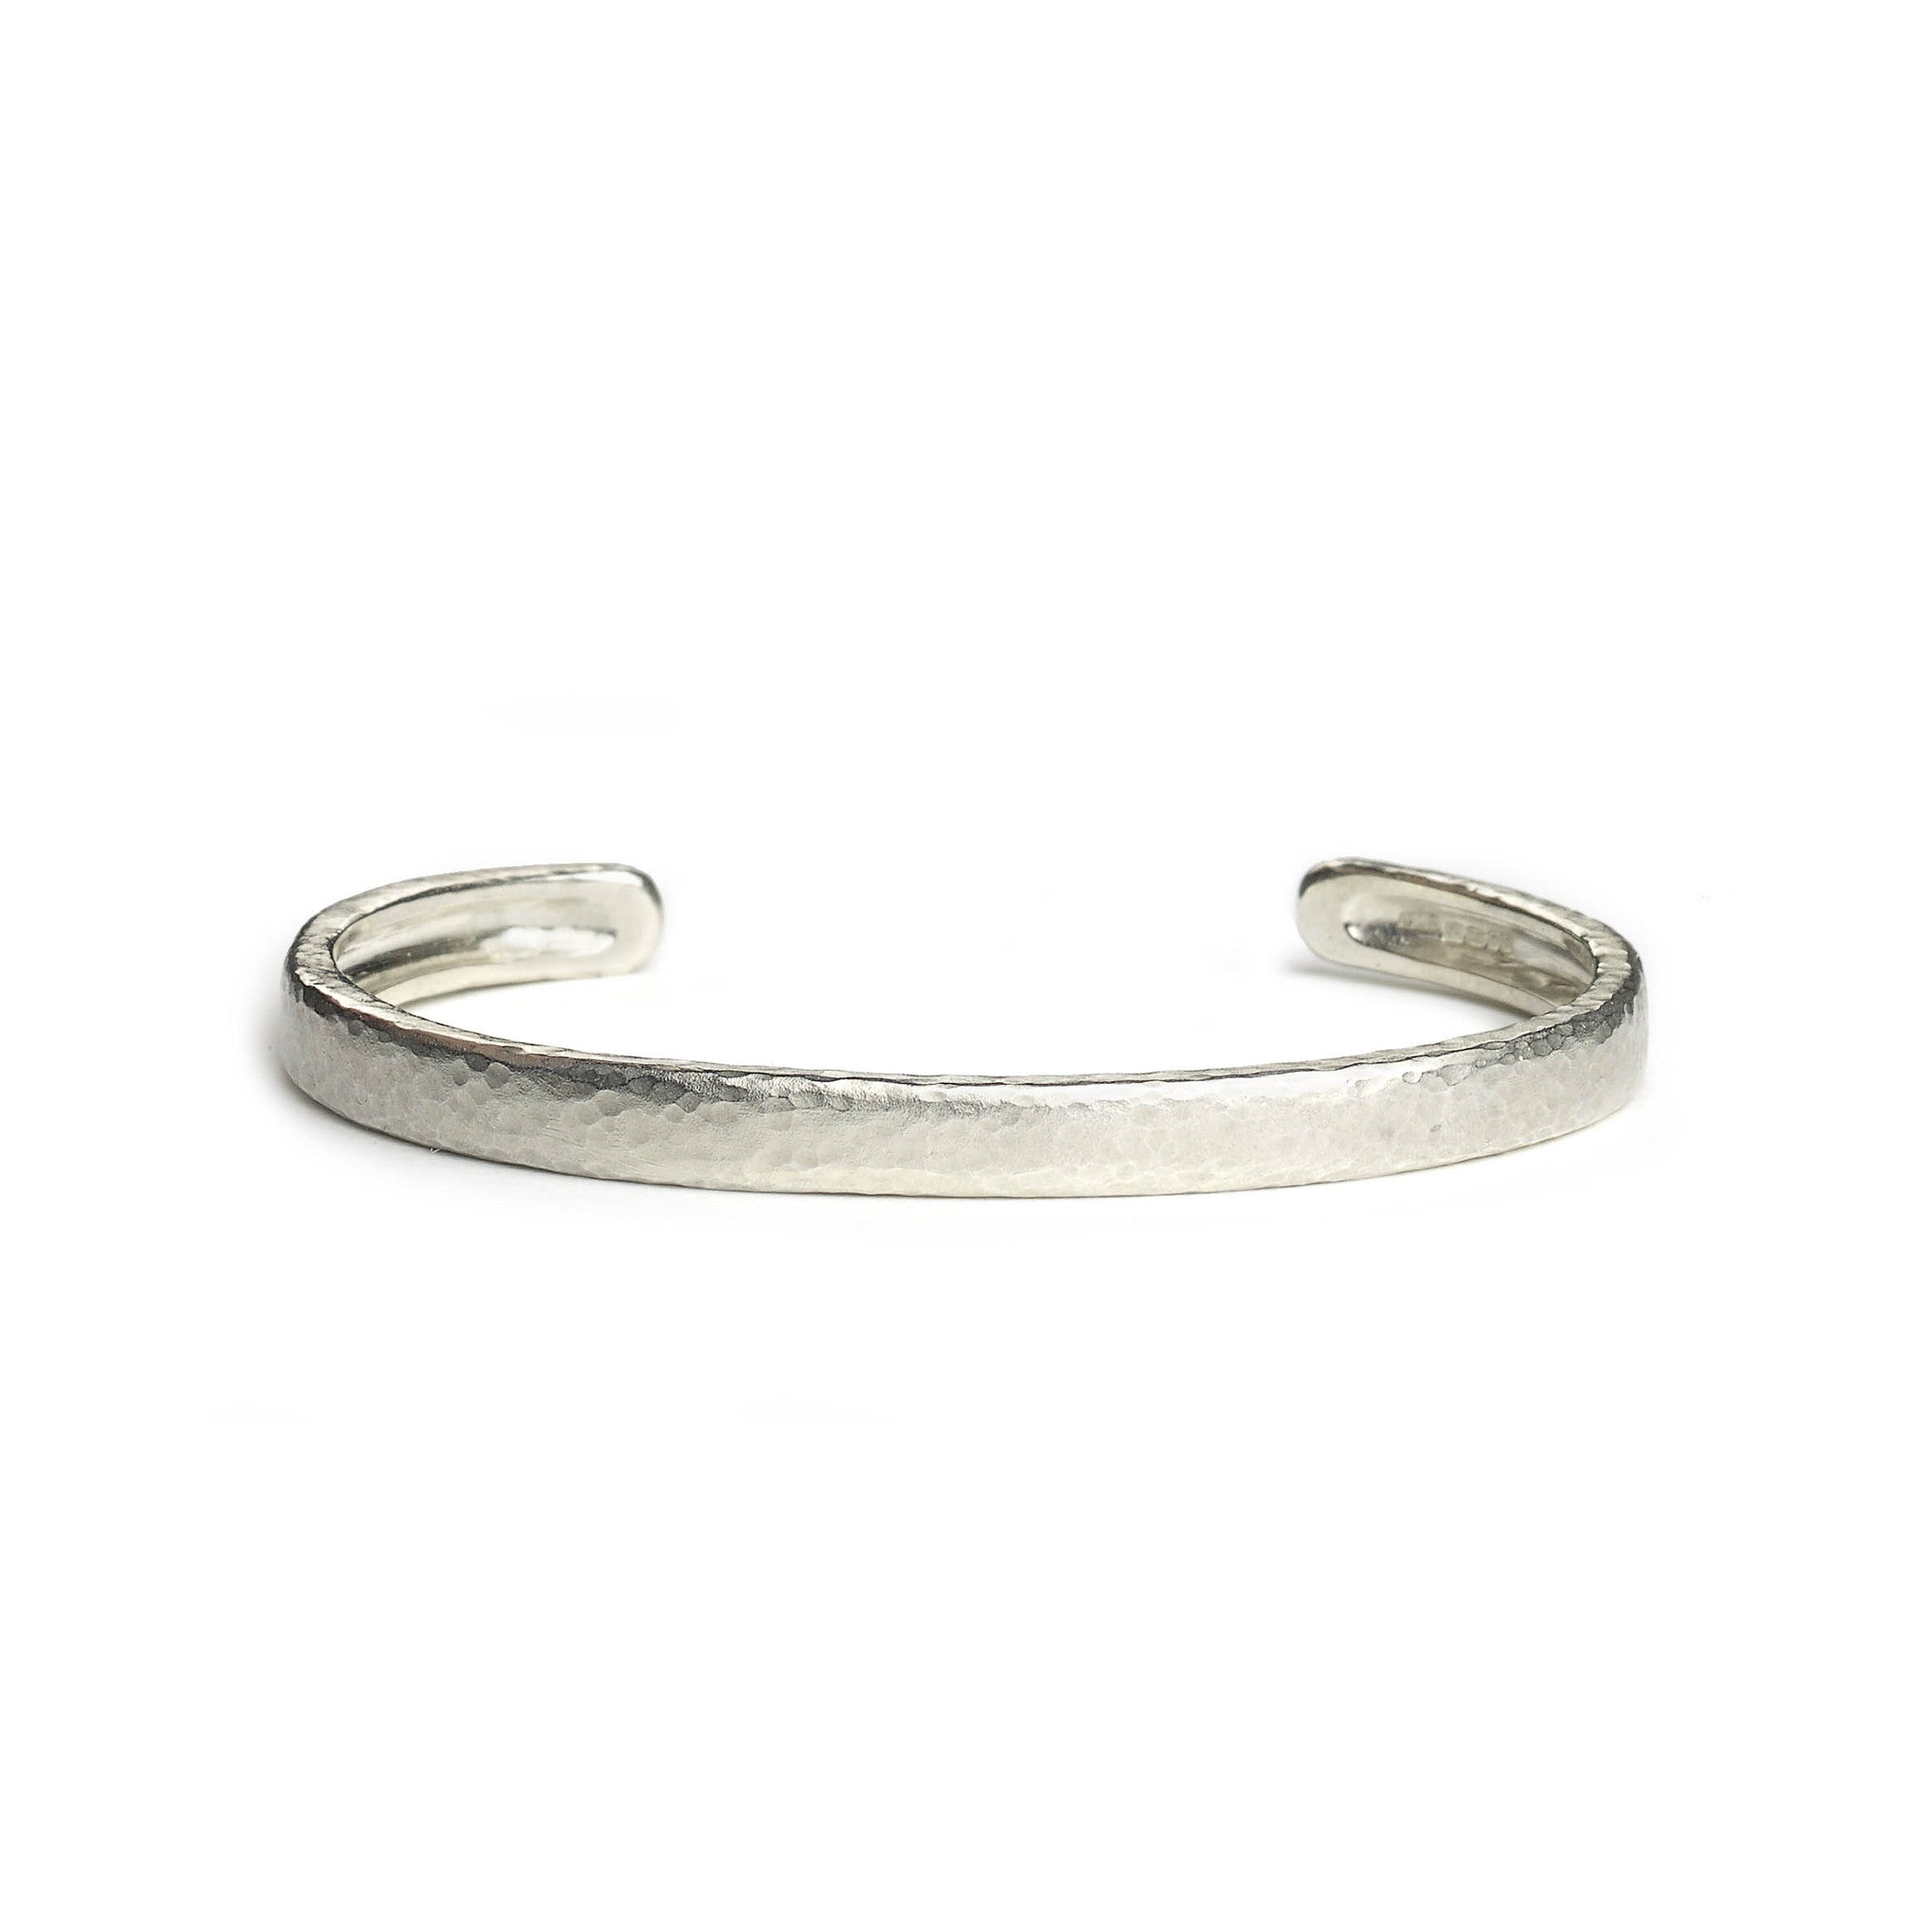 Silver hammered texture bangle on white background